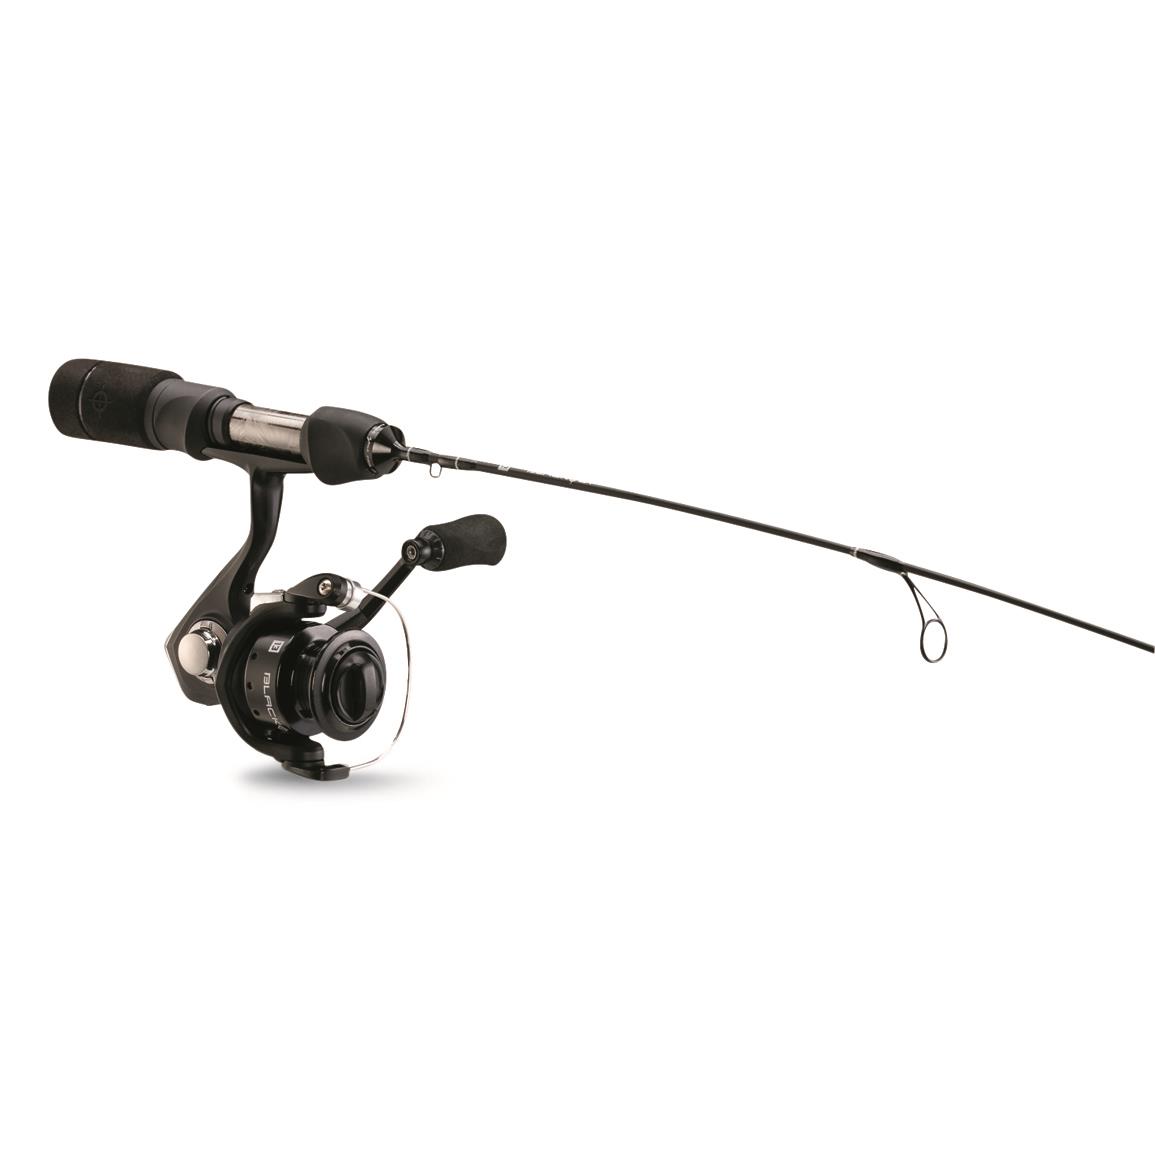 13 Fishing Snitch Pro Ice Fishing Spinning Rod and Reel Combo, 23 Length,  Quick Tip